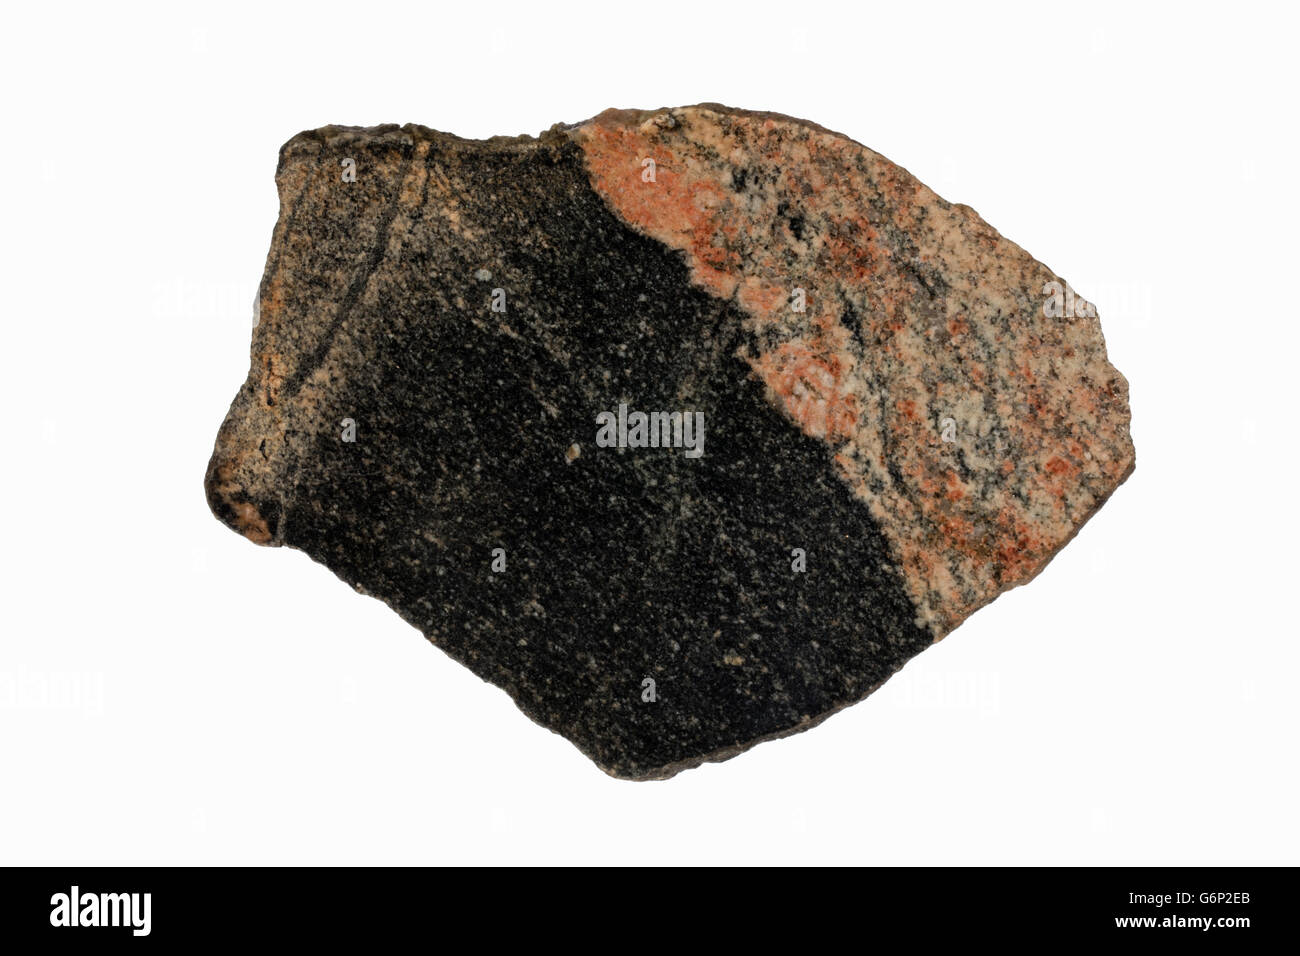 Acasta gneiss,  oldest known exposed crustal rock in the world, 4.03 billion years old, Northwest Territories , Canada, tonalite Stock Photo